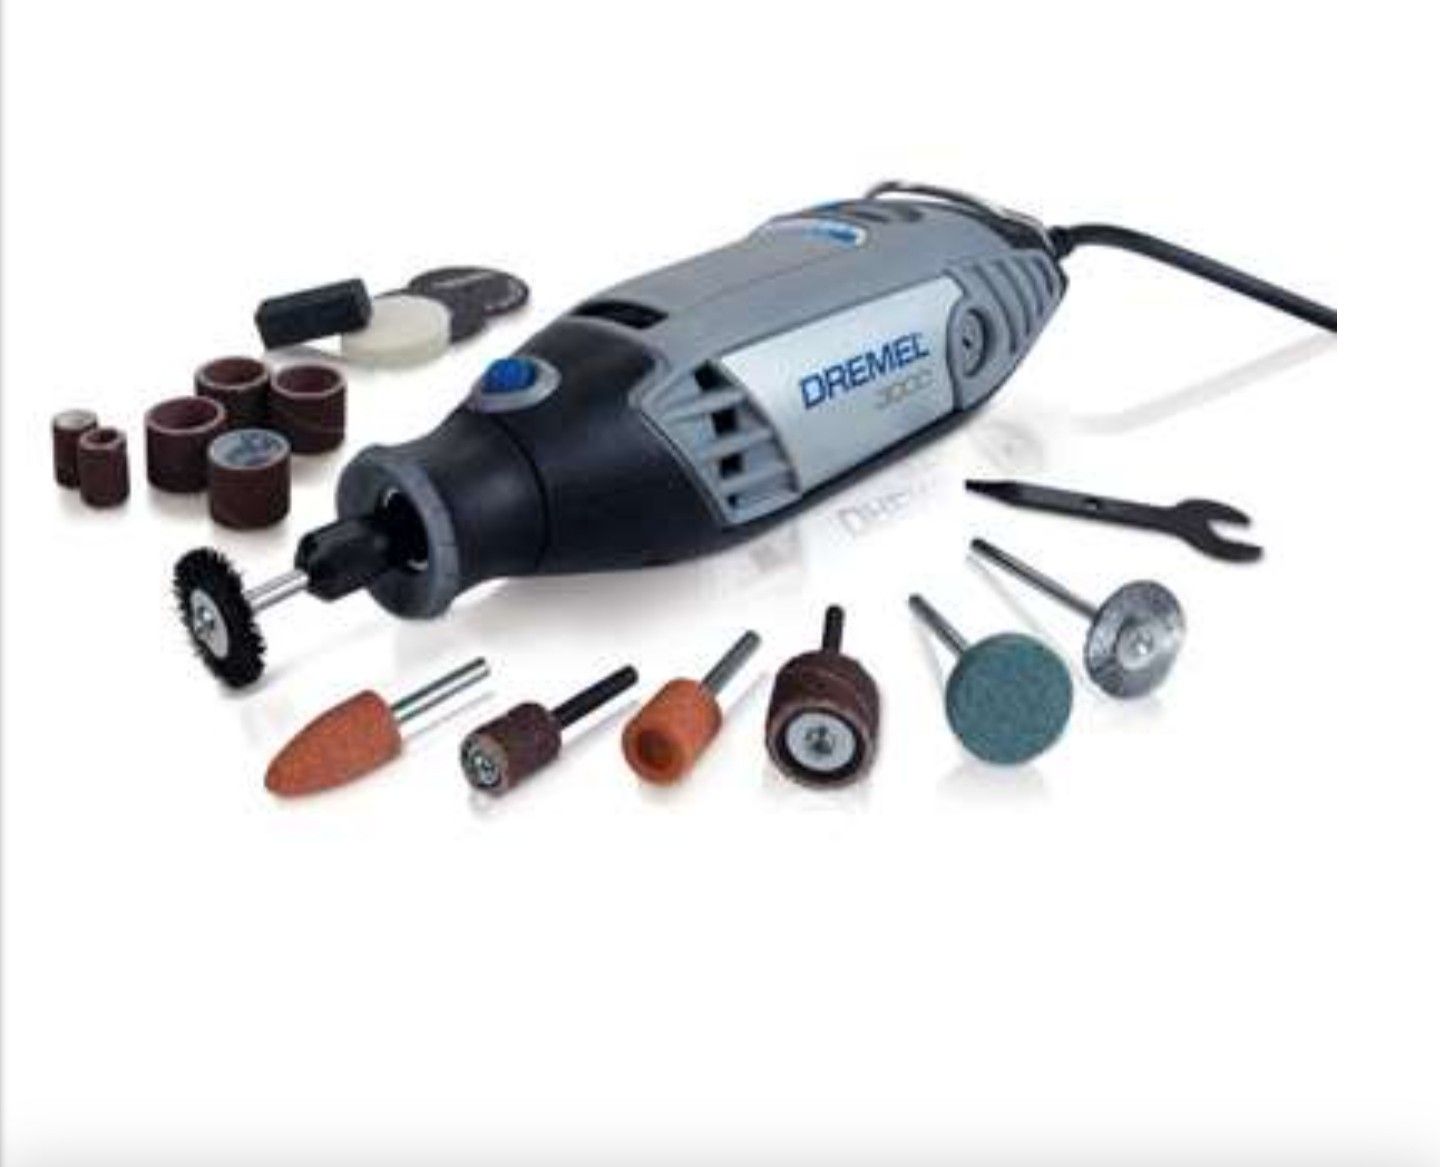 Dremel 3000 1/8 in. Corded Rotary Tool Kit 1.2 amps 120 volt 35000 rpm